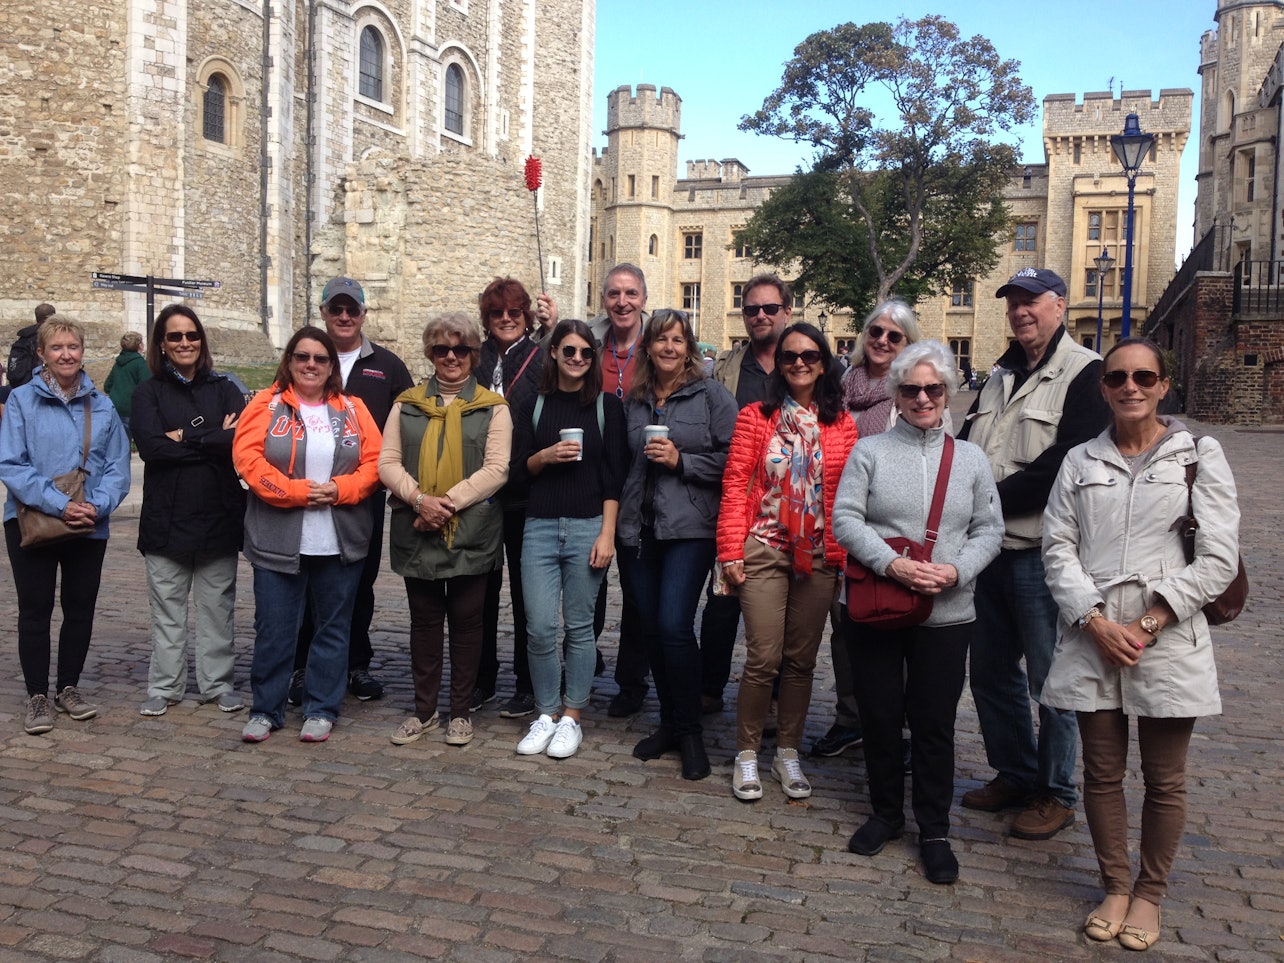 Early-Access Tower of London: Complete Tour with Crown Jewel & Opening Ceremony - Accommodations in London